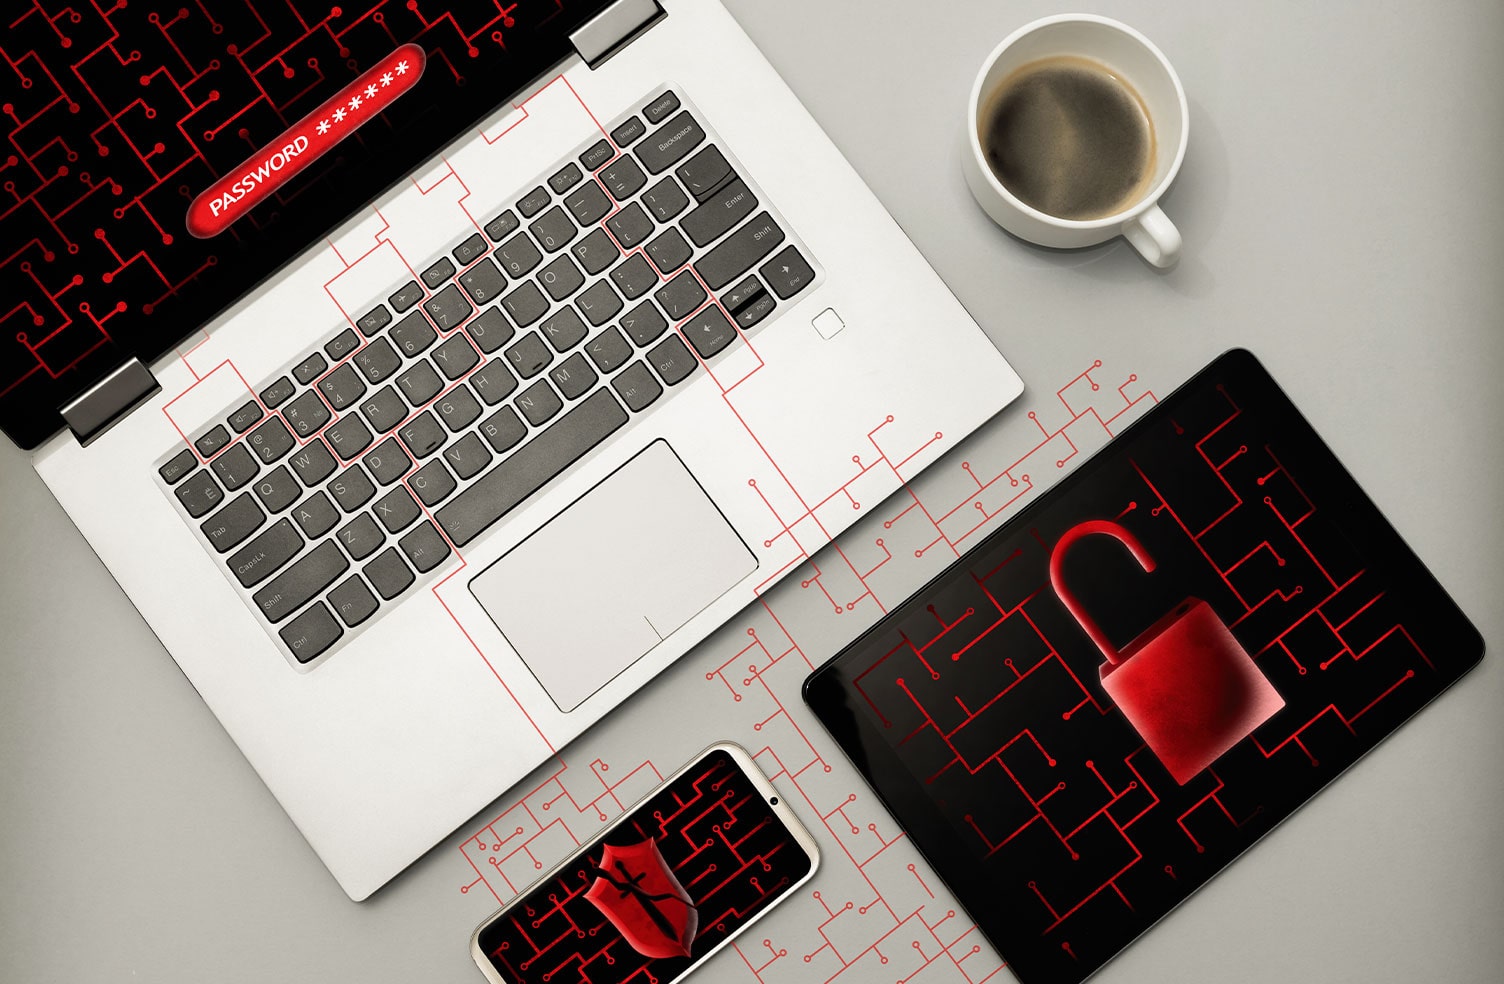 ransomware attack across multiple devices